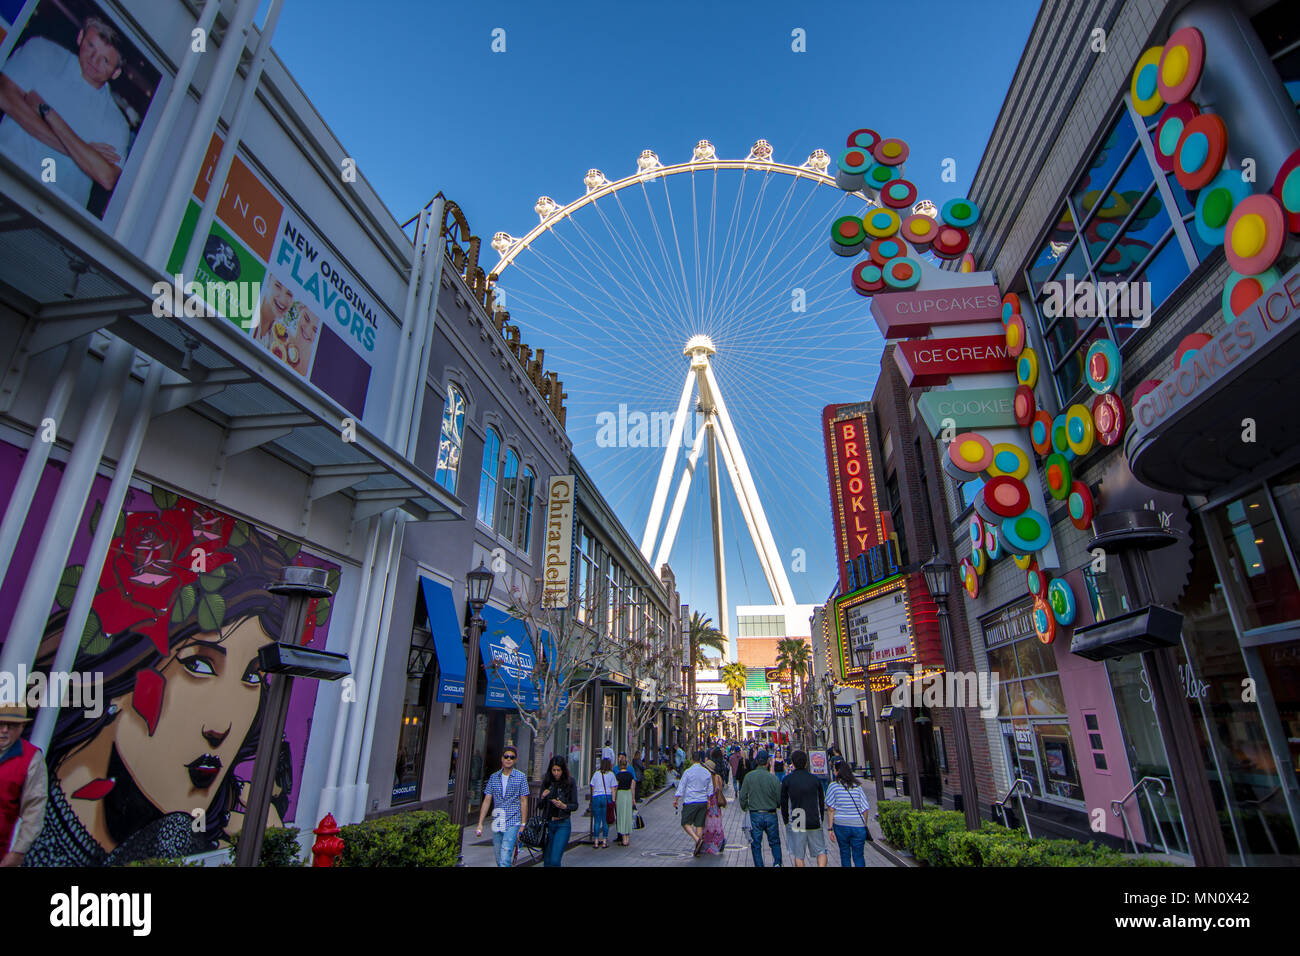 Las Vegas, US - April 27, 2018: Tourtists visting the LInq promenade and High roller in Las Vegas as seen on a sunny day Stock Photo